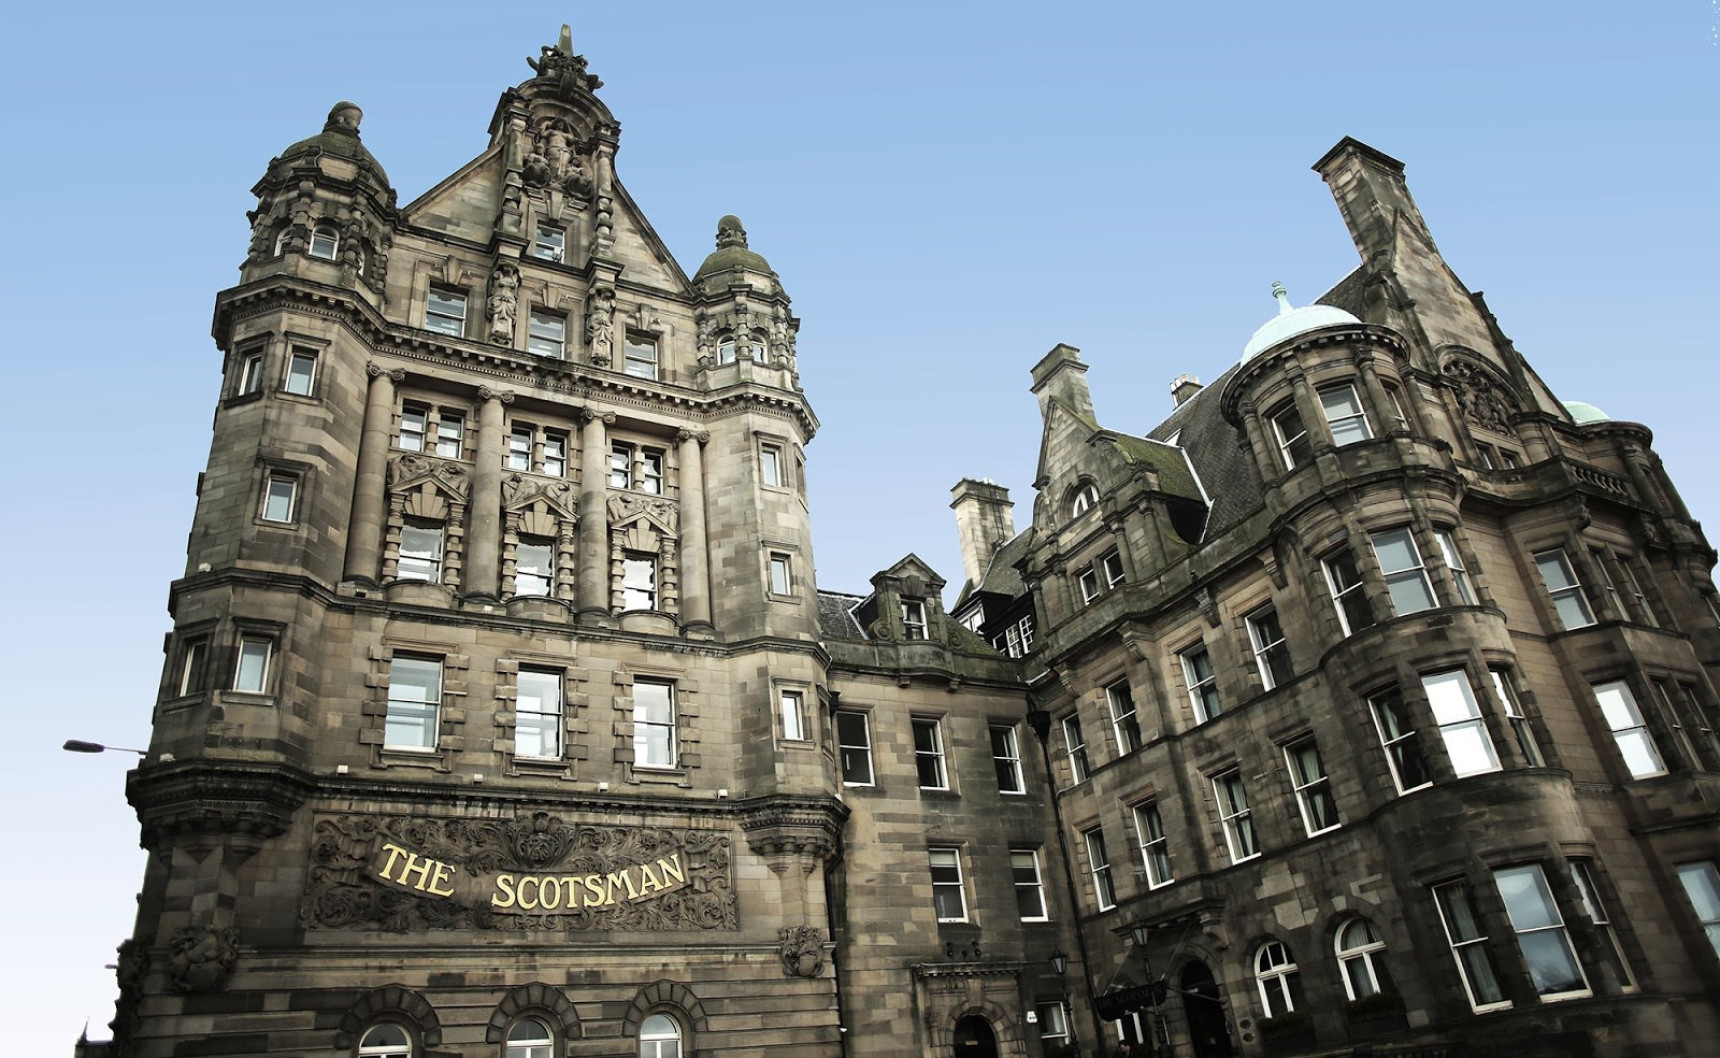 The Scotsman Hotel from the outside